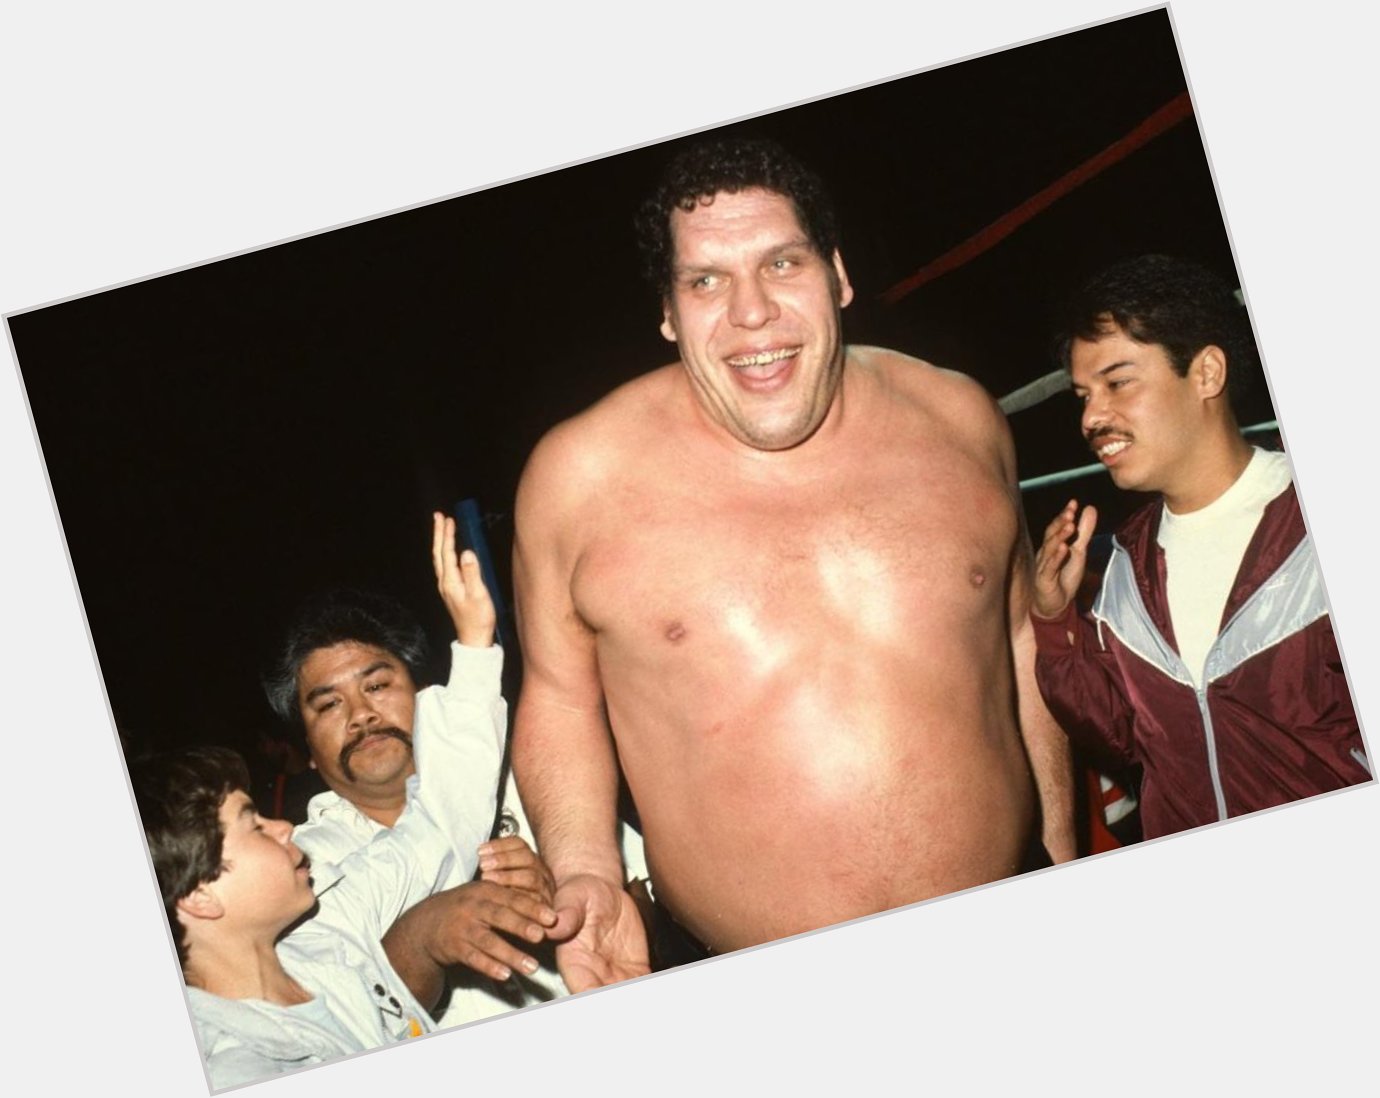 Happy Birthday to The Eight Wonder of the World, André The Giant. He would have turned 77 years old. 